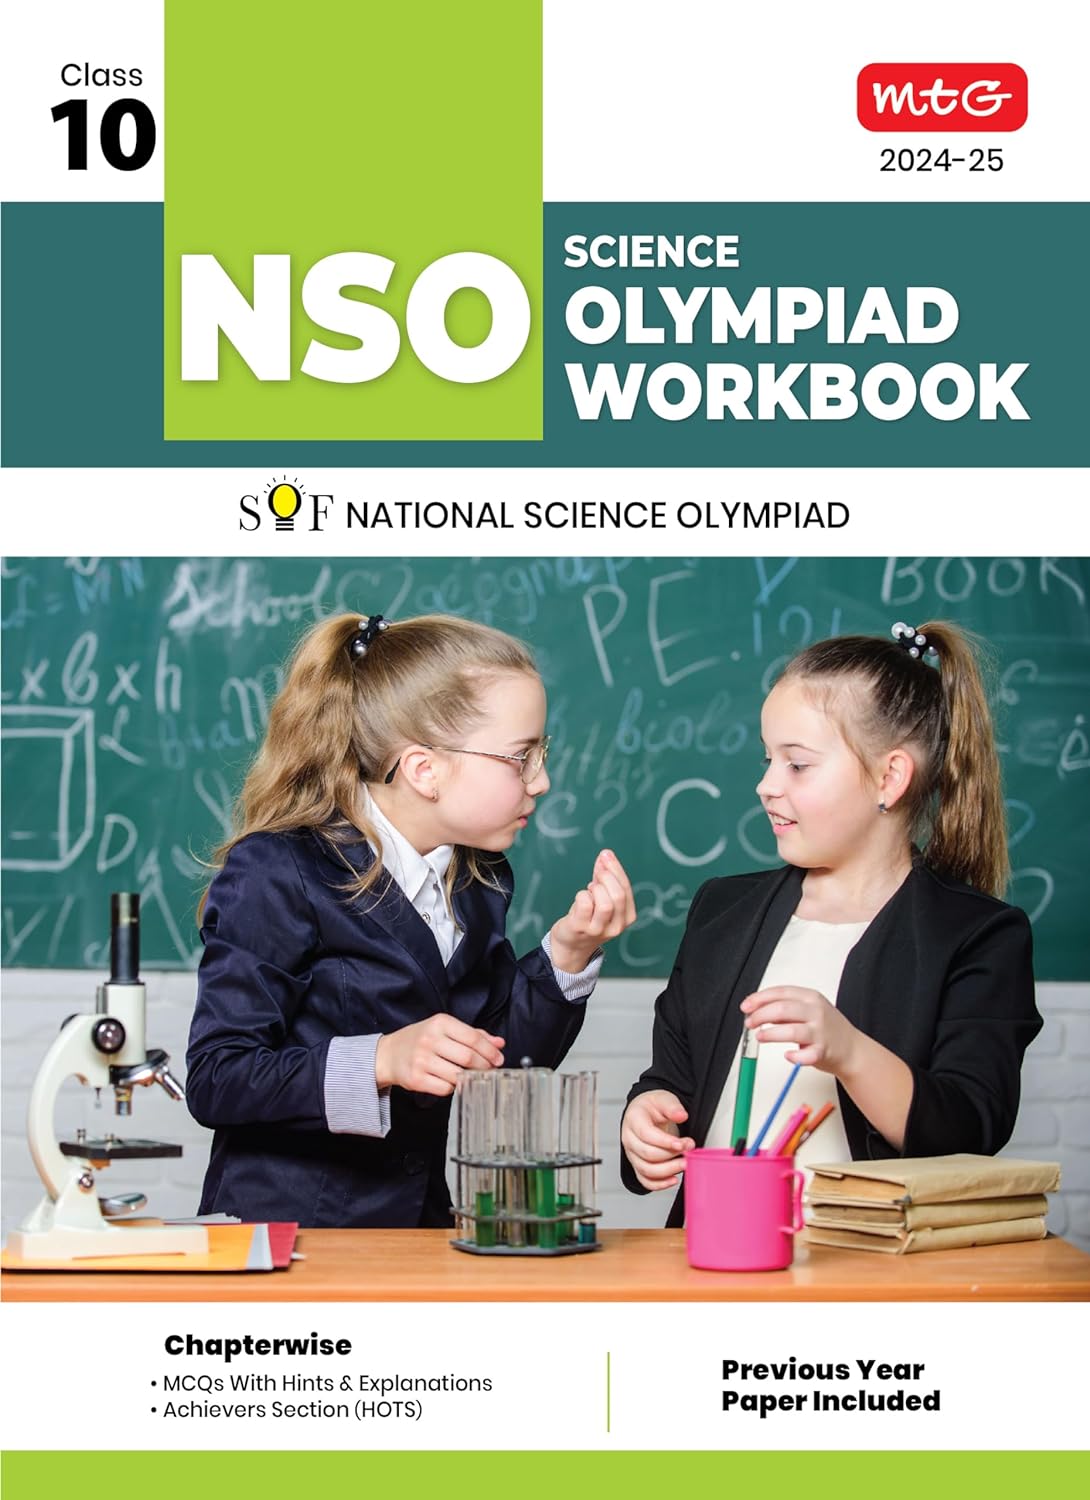 MTG Olympiad NSO Science Workbook For Class 10 - Latest for 2024-25 Session